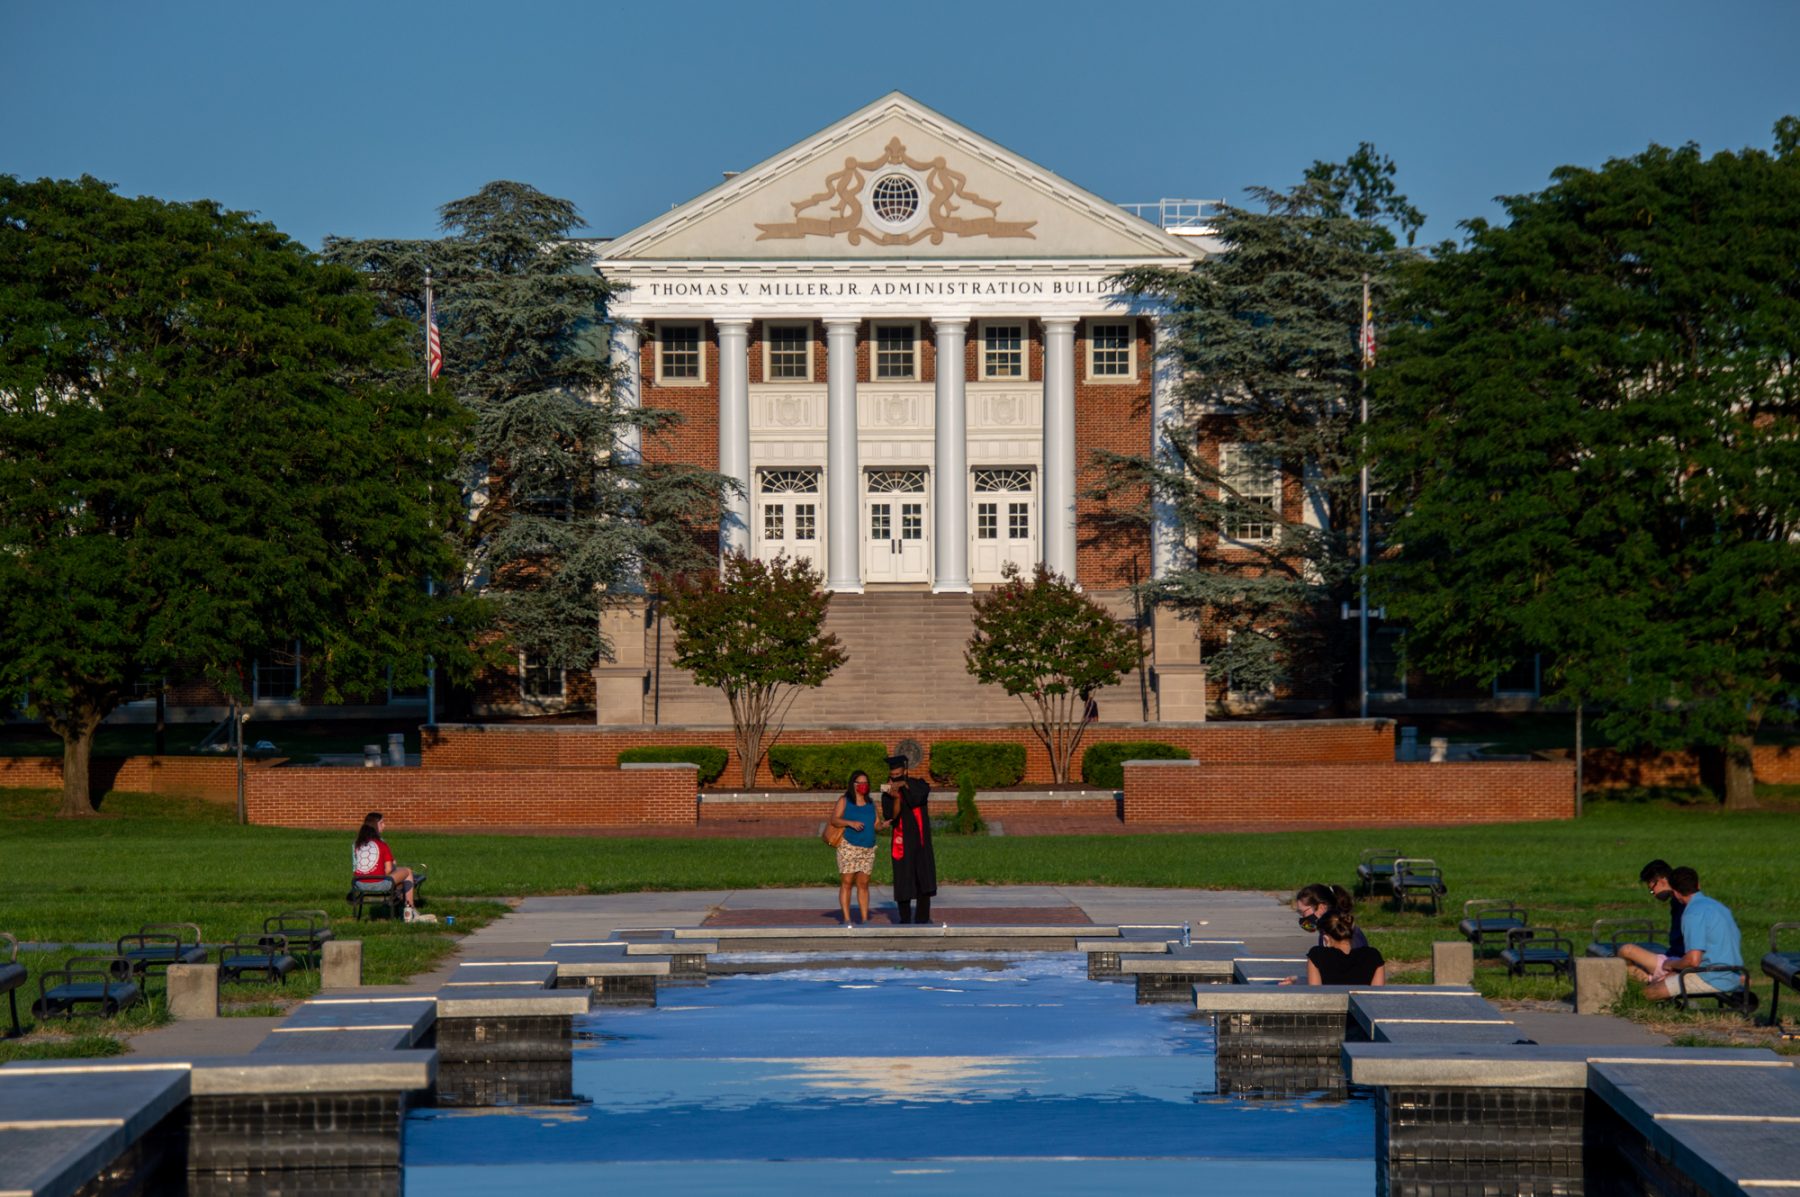 UMD Sees Lowest Admissions Rate In Over A Decade For 2020 2021 Cycle